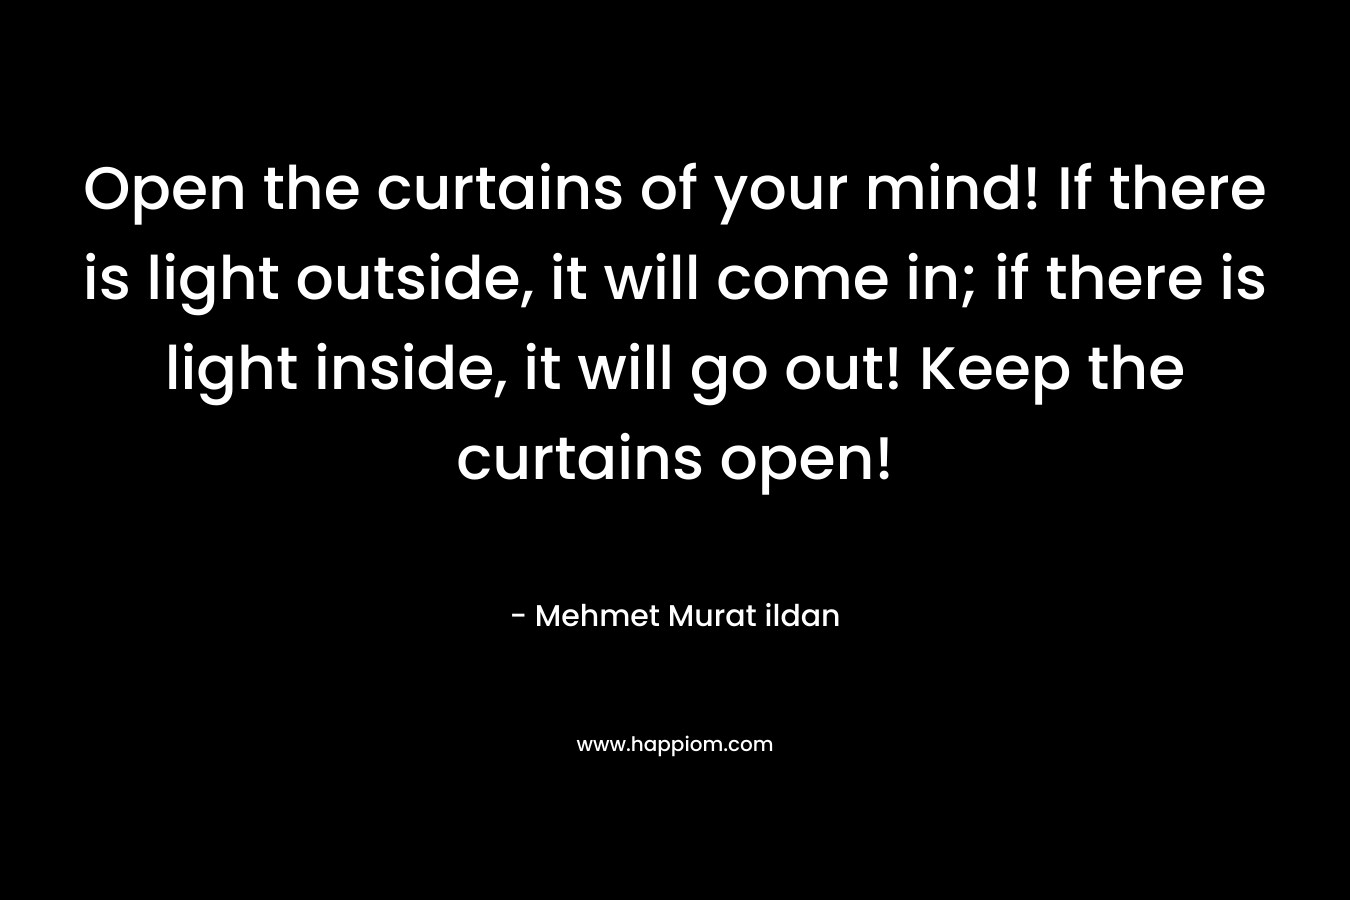 Open the curtains of your mind! If there is light outside, it will come in; if there is light inside, it will go out! Keep the curtains open!